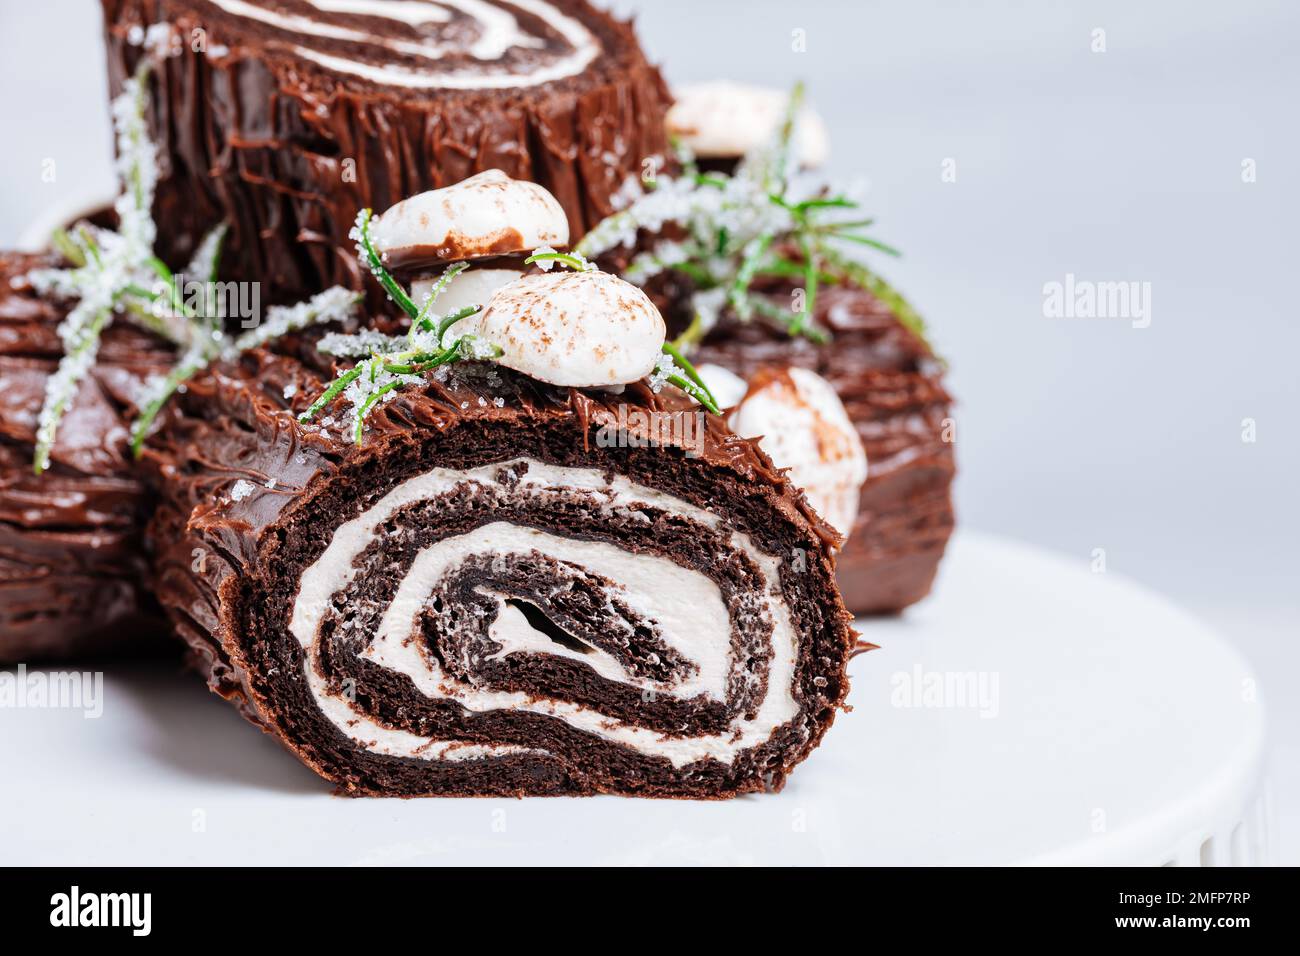 French dessert called Yule log or bûche de Noël with merengue mushrooms and leaves on top of chocolate glazing. Placed in front of Christmas tree. Dec Stock Photo